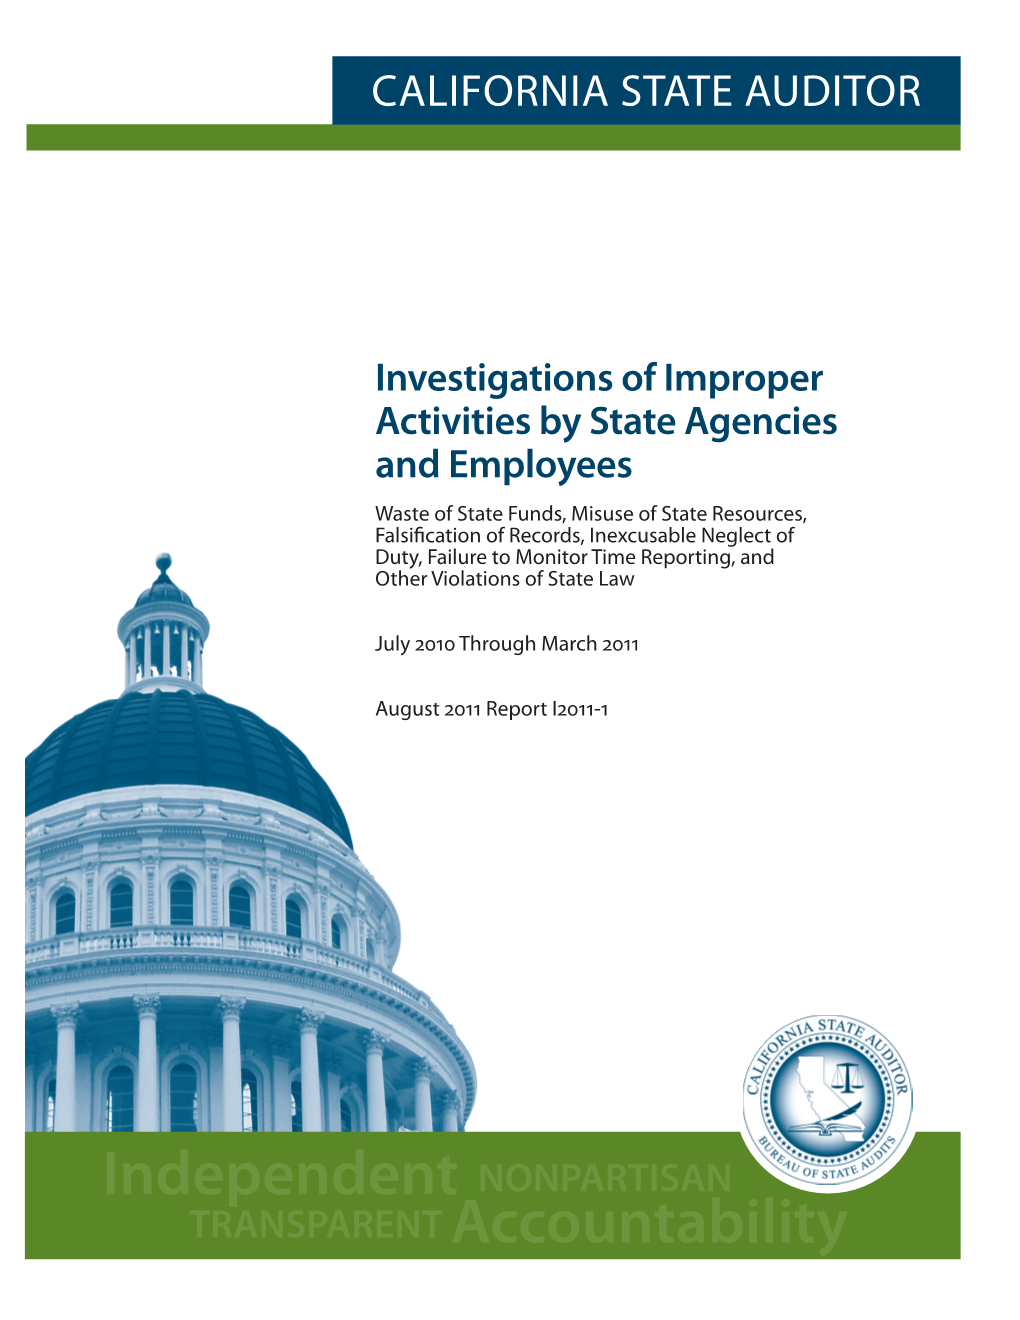 Investigations of Improper Activities by State Agencies and Employees